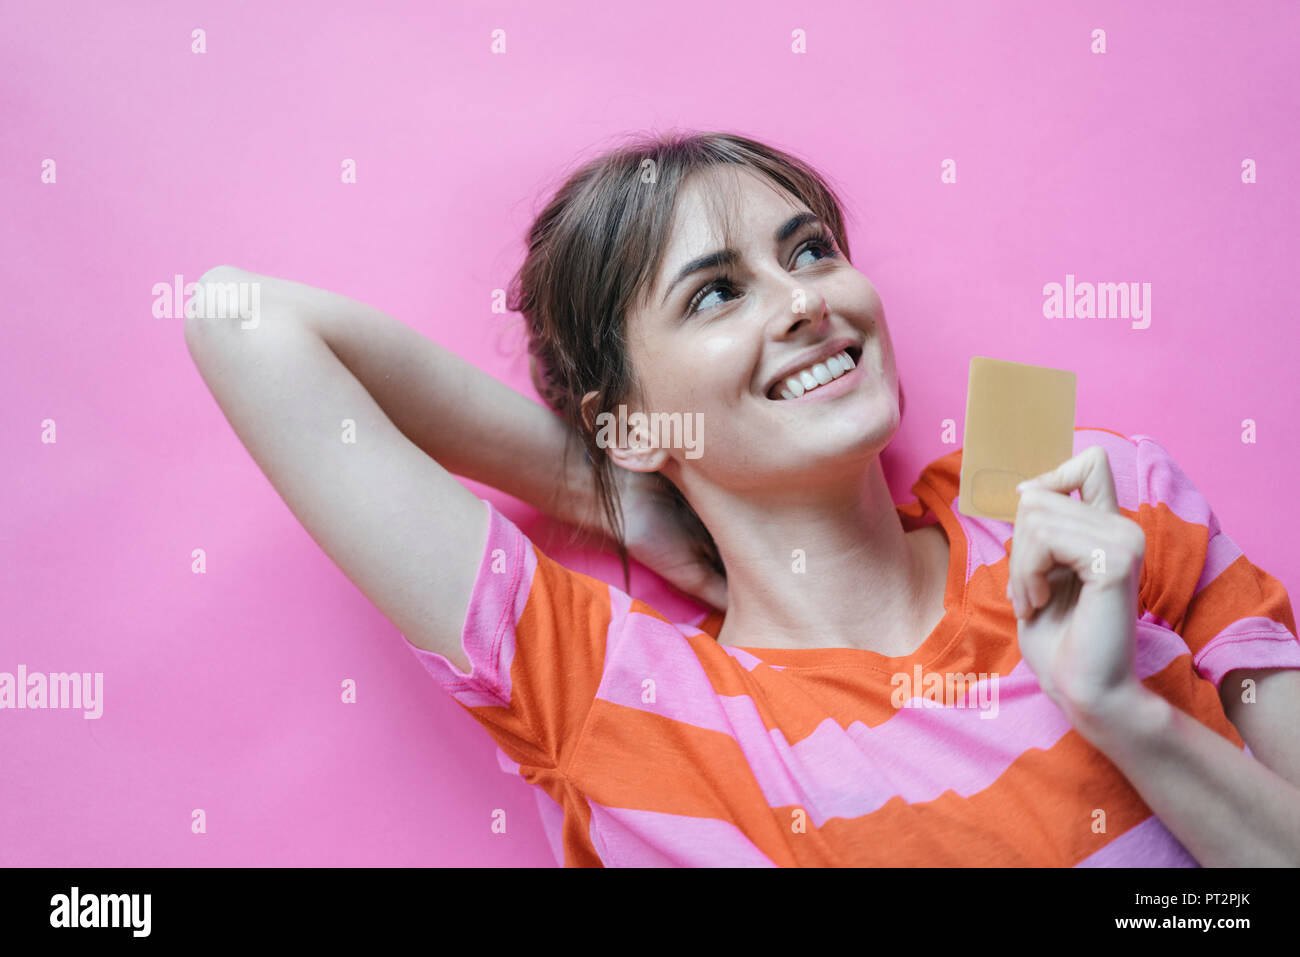 Woman lying on pink background with hands behind head, holding credit card Stock Photo